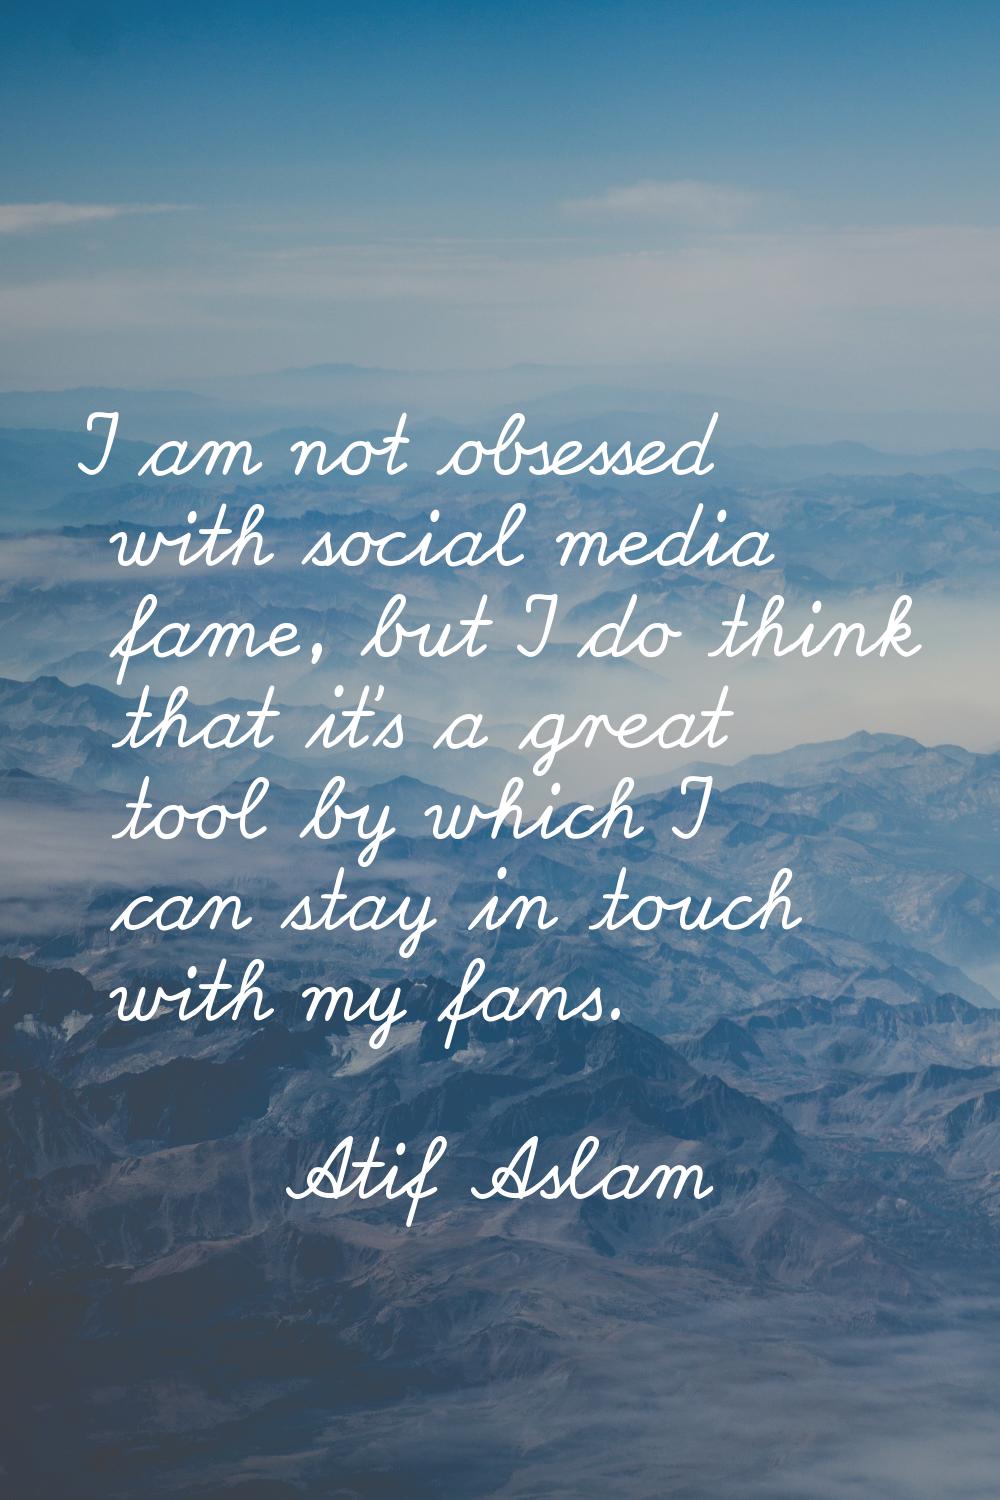 I am not obsessed with social media fame, but I do think that it's a great tool by which I can stay